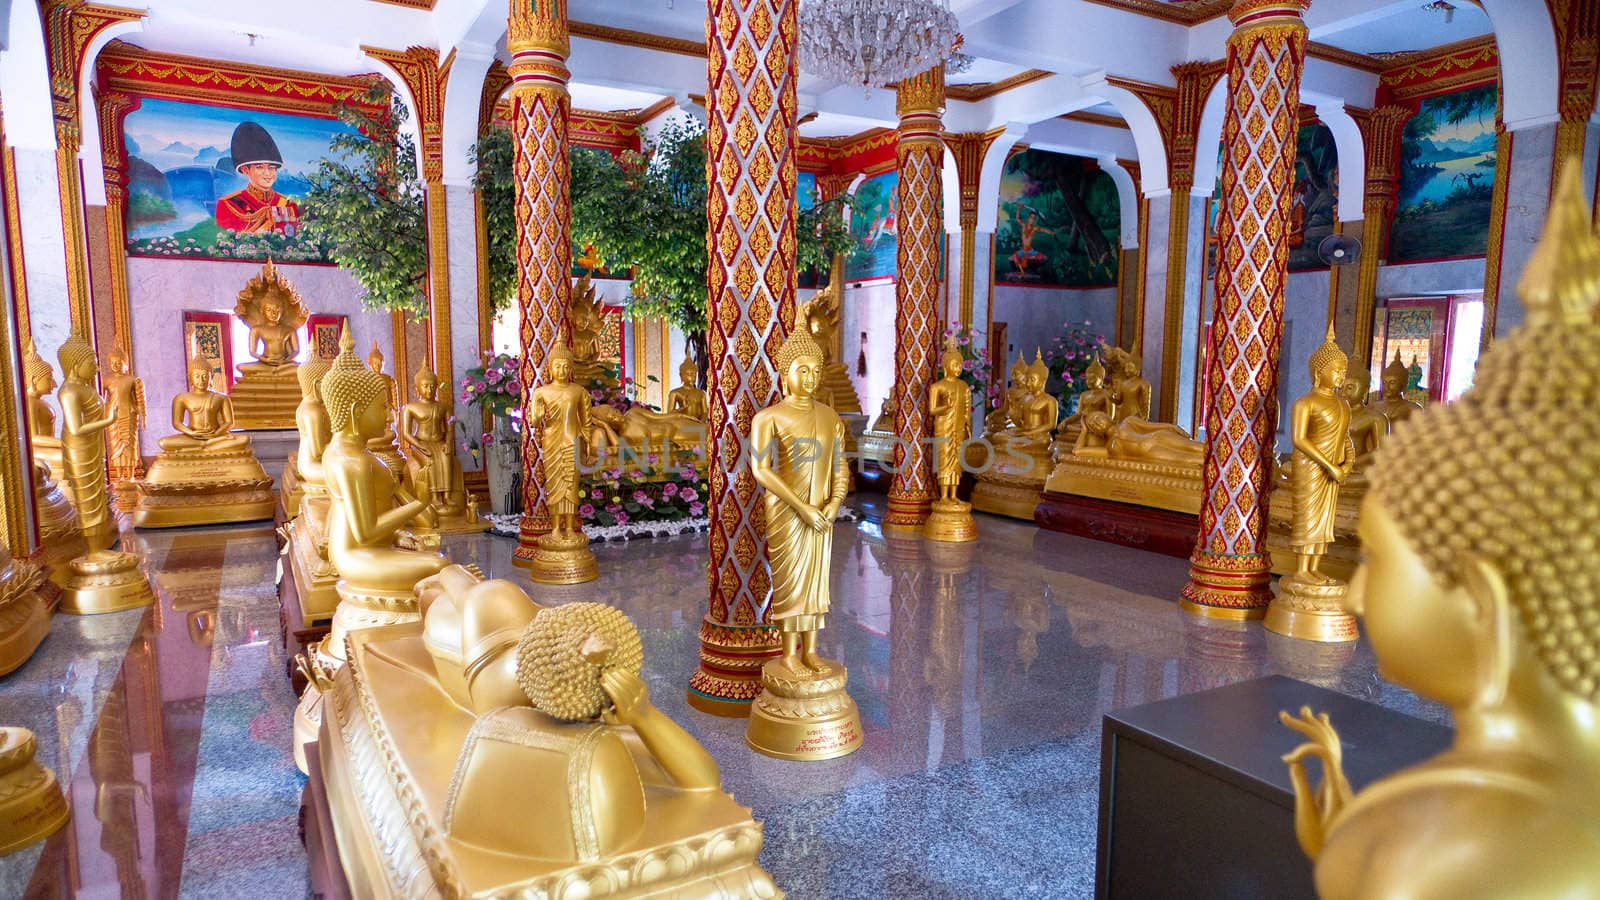 Hall with statues of Buddha in buddhist temple, Thailand